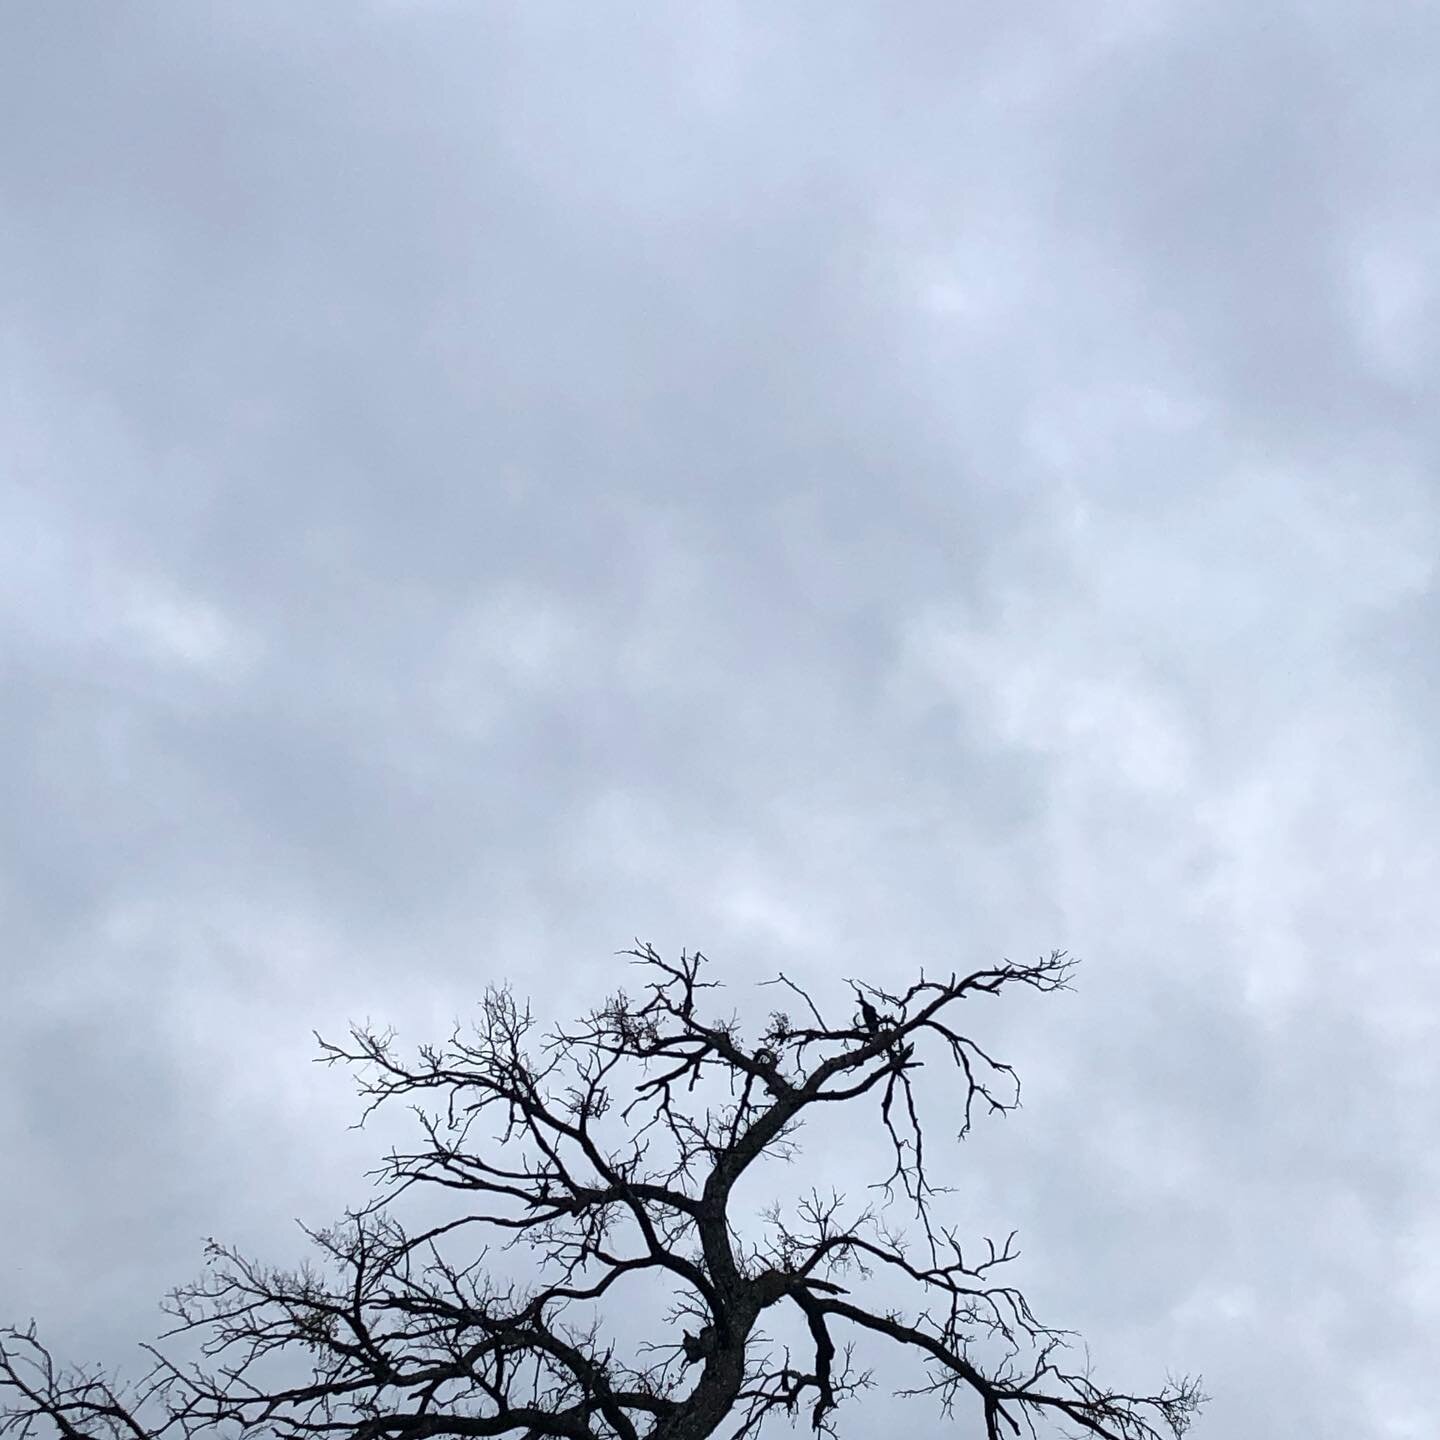 I am not normally a lover of spooky things. But this random fall weather, dead tree, overcast sky and a raven in the uppermost branches? It was like Halloween teaching into September to say hello. Are you more excited about fall than you ever have be